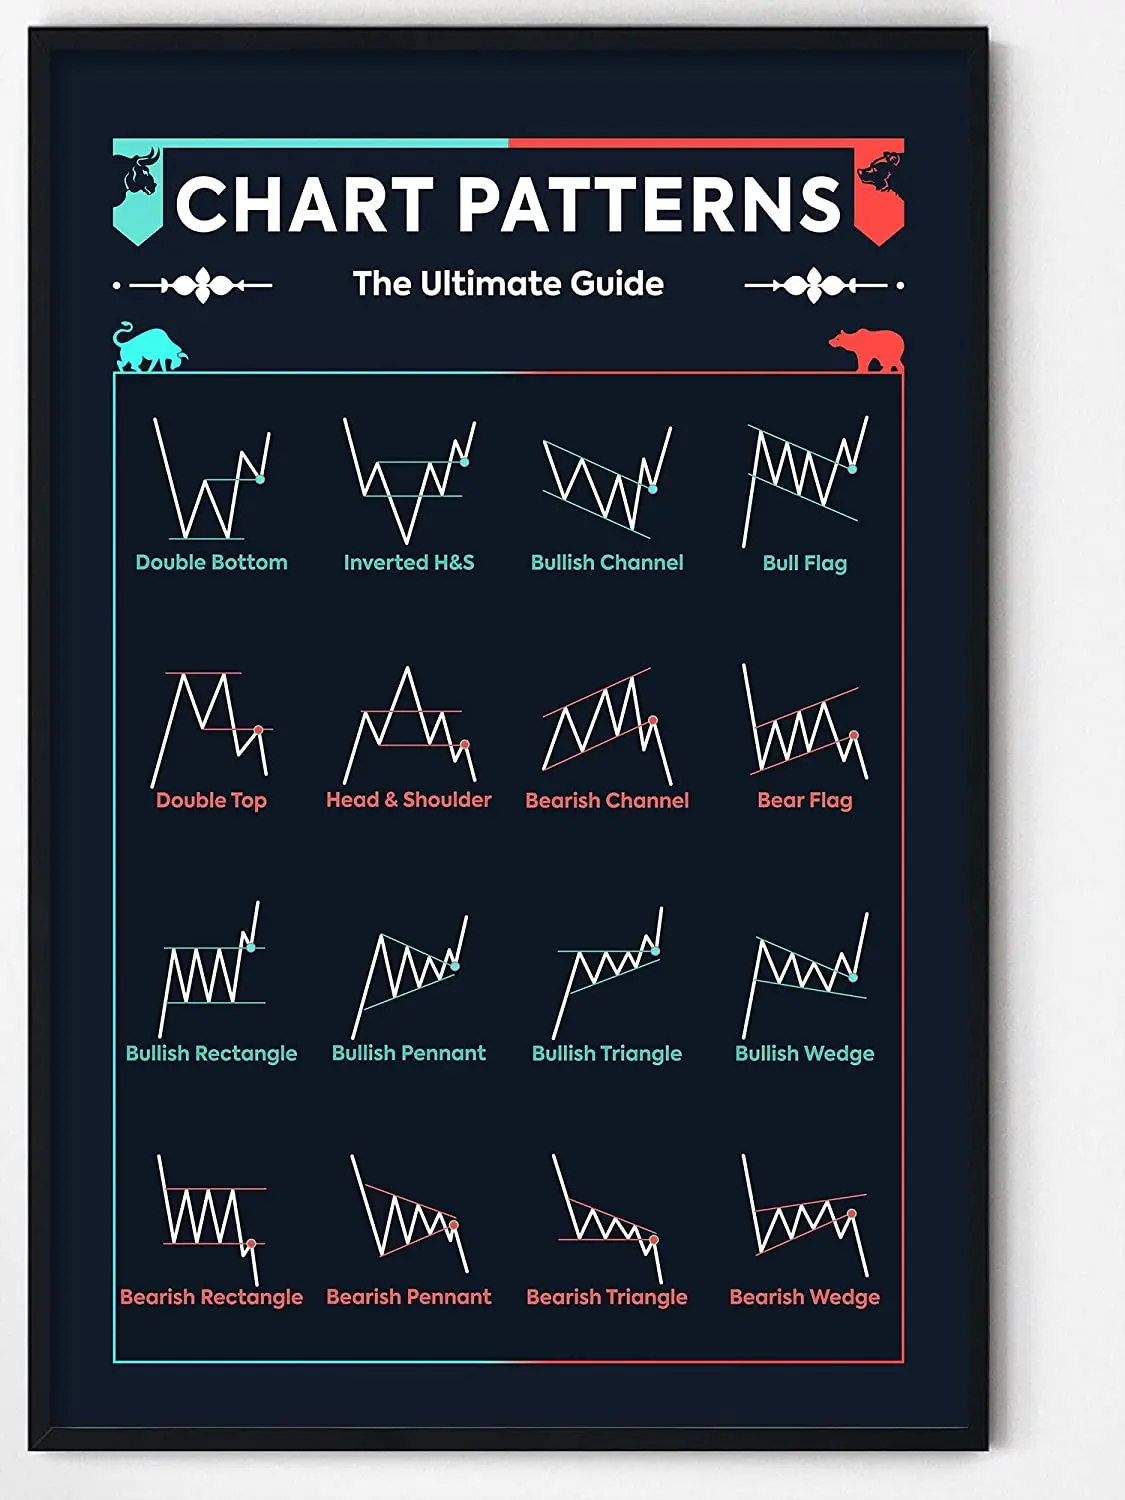 

Picofyou Stock Poster - Trading Chart Patterns Cheat Sheet Poster for Stock Market, Bitcoin - Stock Trader Decor Artwork Gift